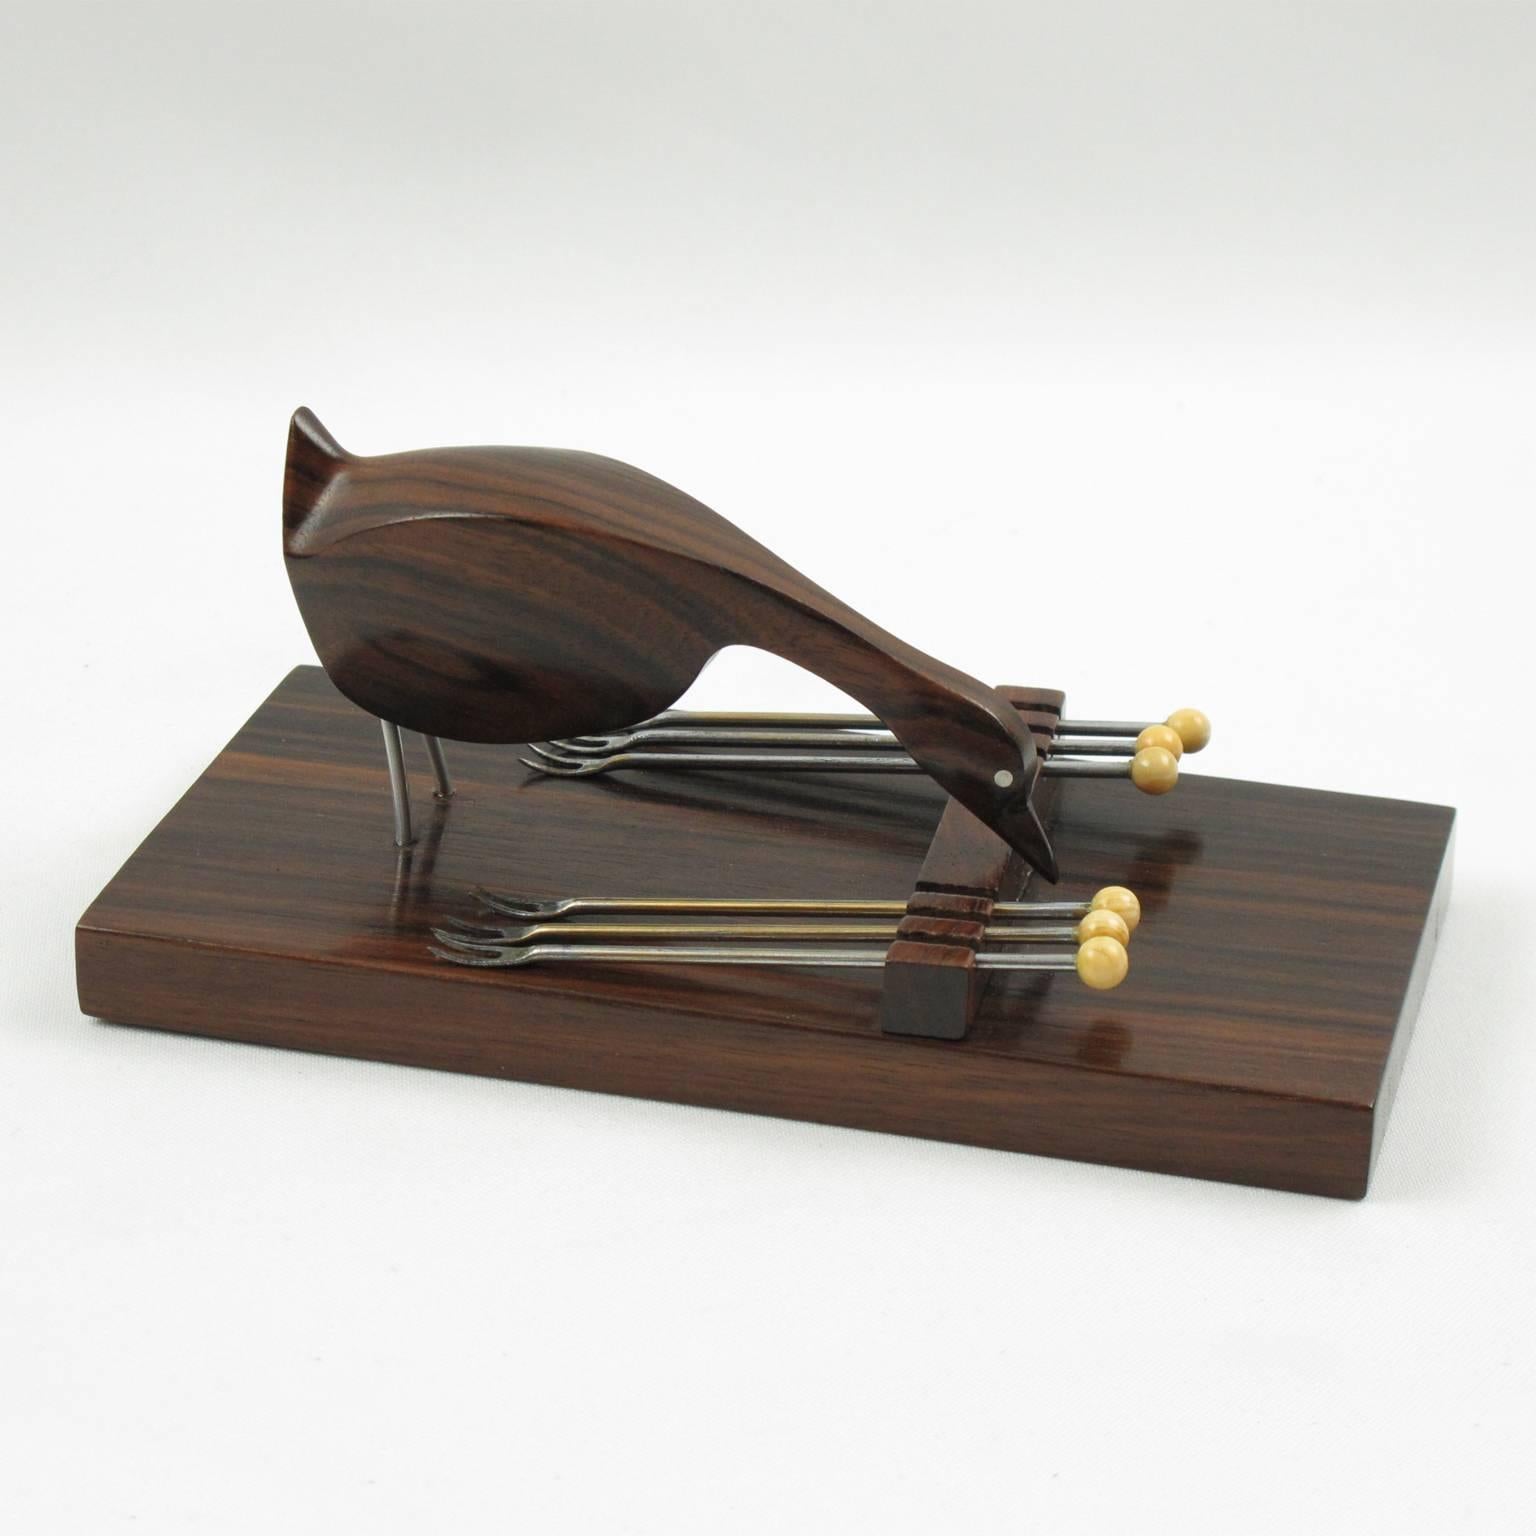 Rare vintage barware bar set cocktail picks. Wonderful French Art Deco bar accessory made of Macassar ebony wood and bone. Features a lovely hand-carved goose with chromed metal legs and eyes on a wood base with six metal cocktail forks with bone